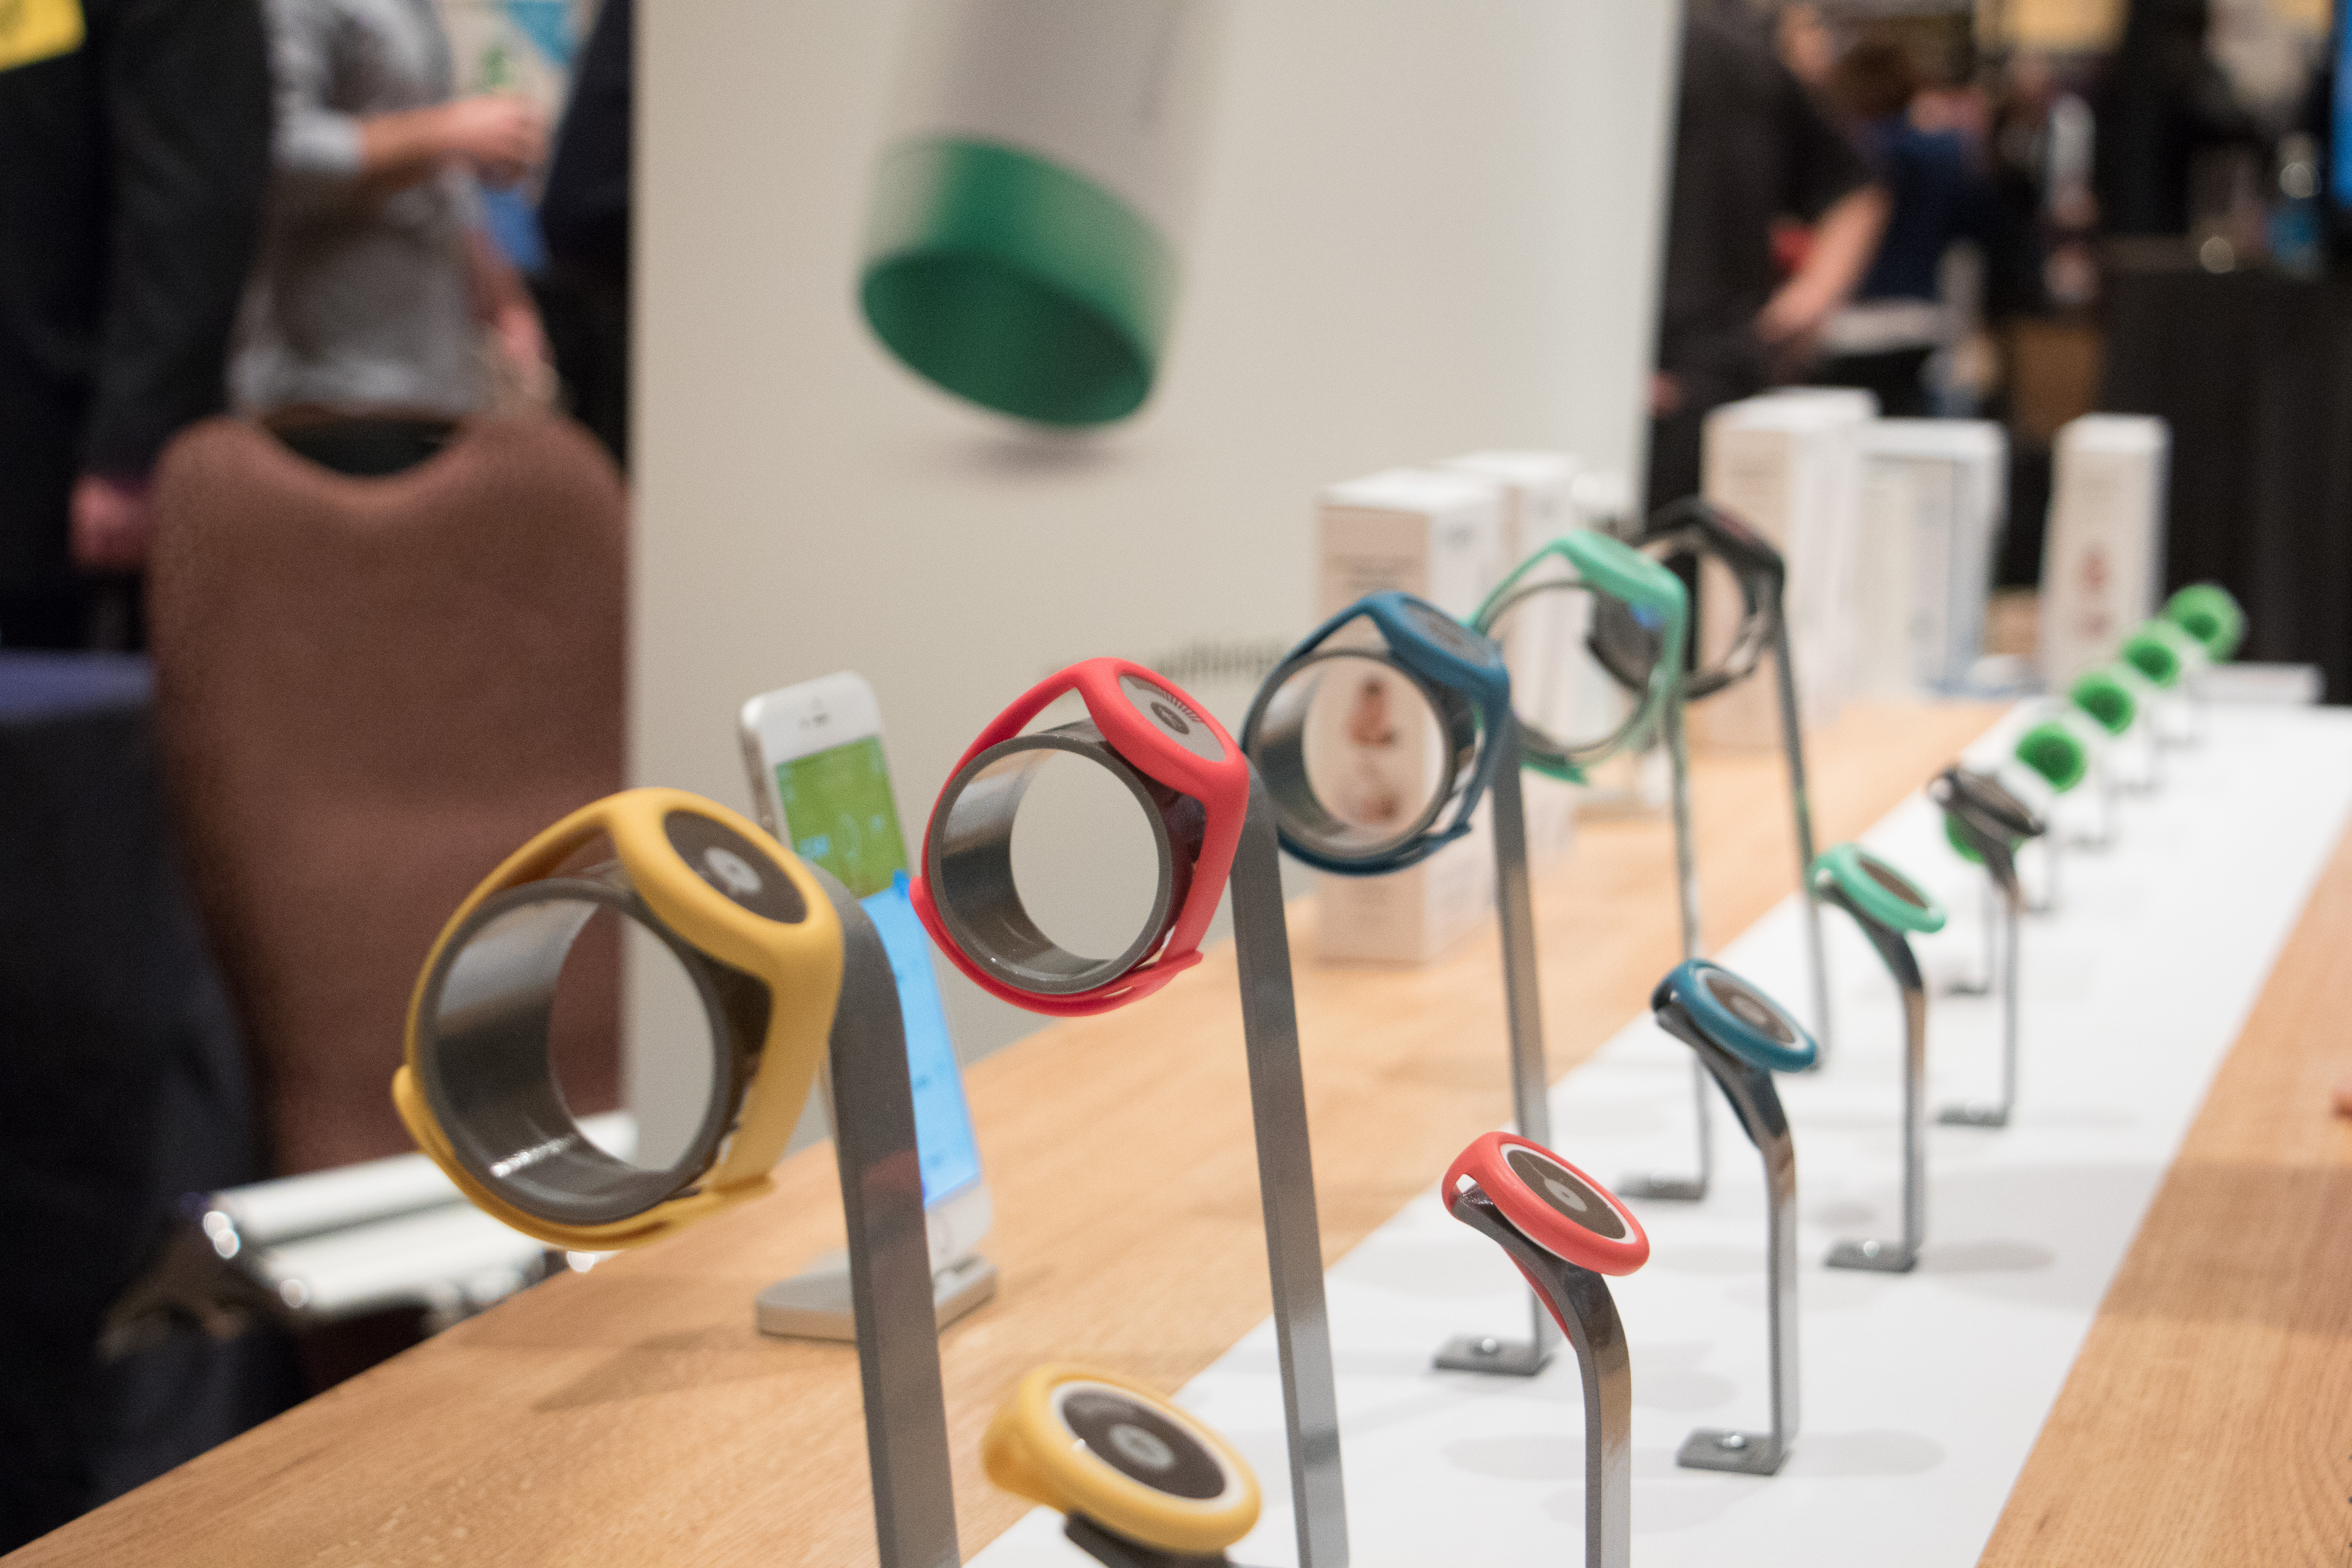 Opinion: Nokia hasn't been healthy for Withings, Apple should